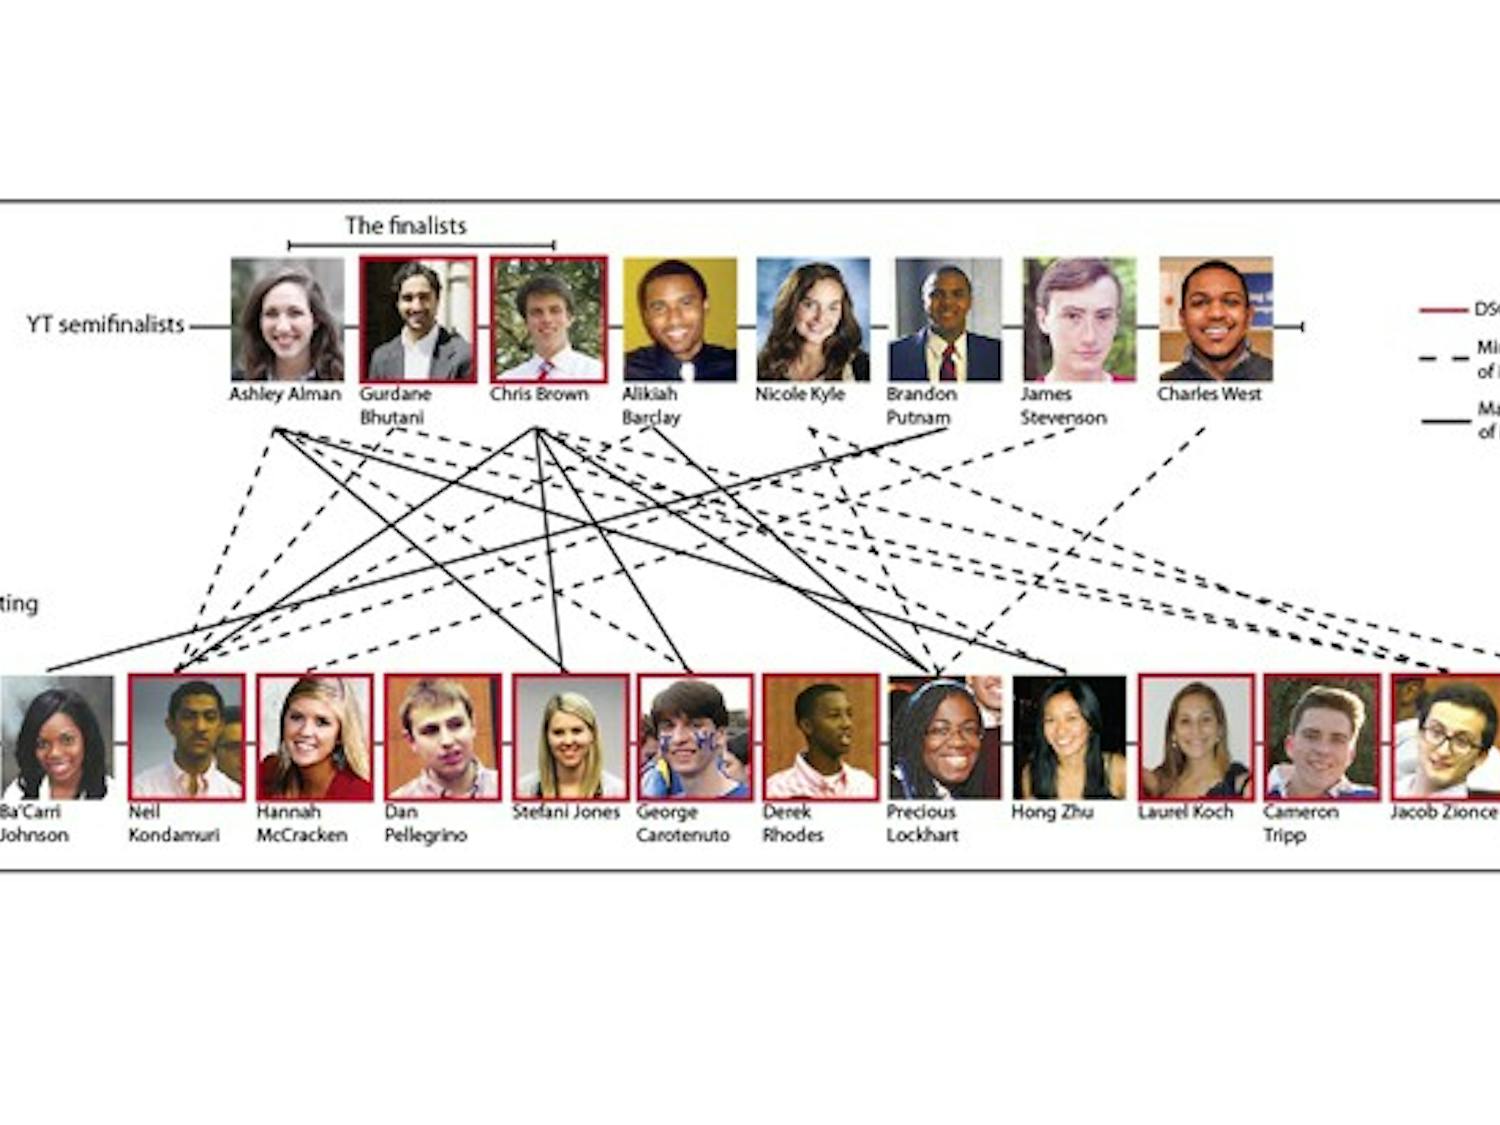 This chart depicts the network of both close and business-like relationships between Young Trustee Nominating Committee members and the semifinalists, as disclosed by the committee.